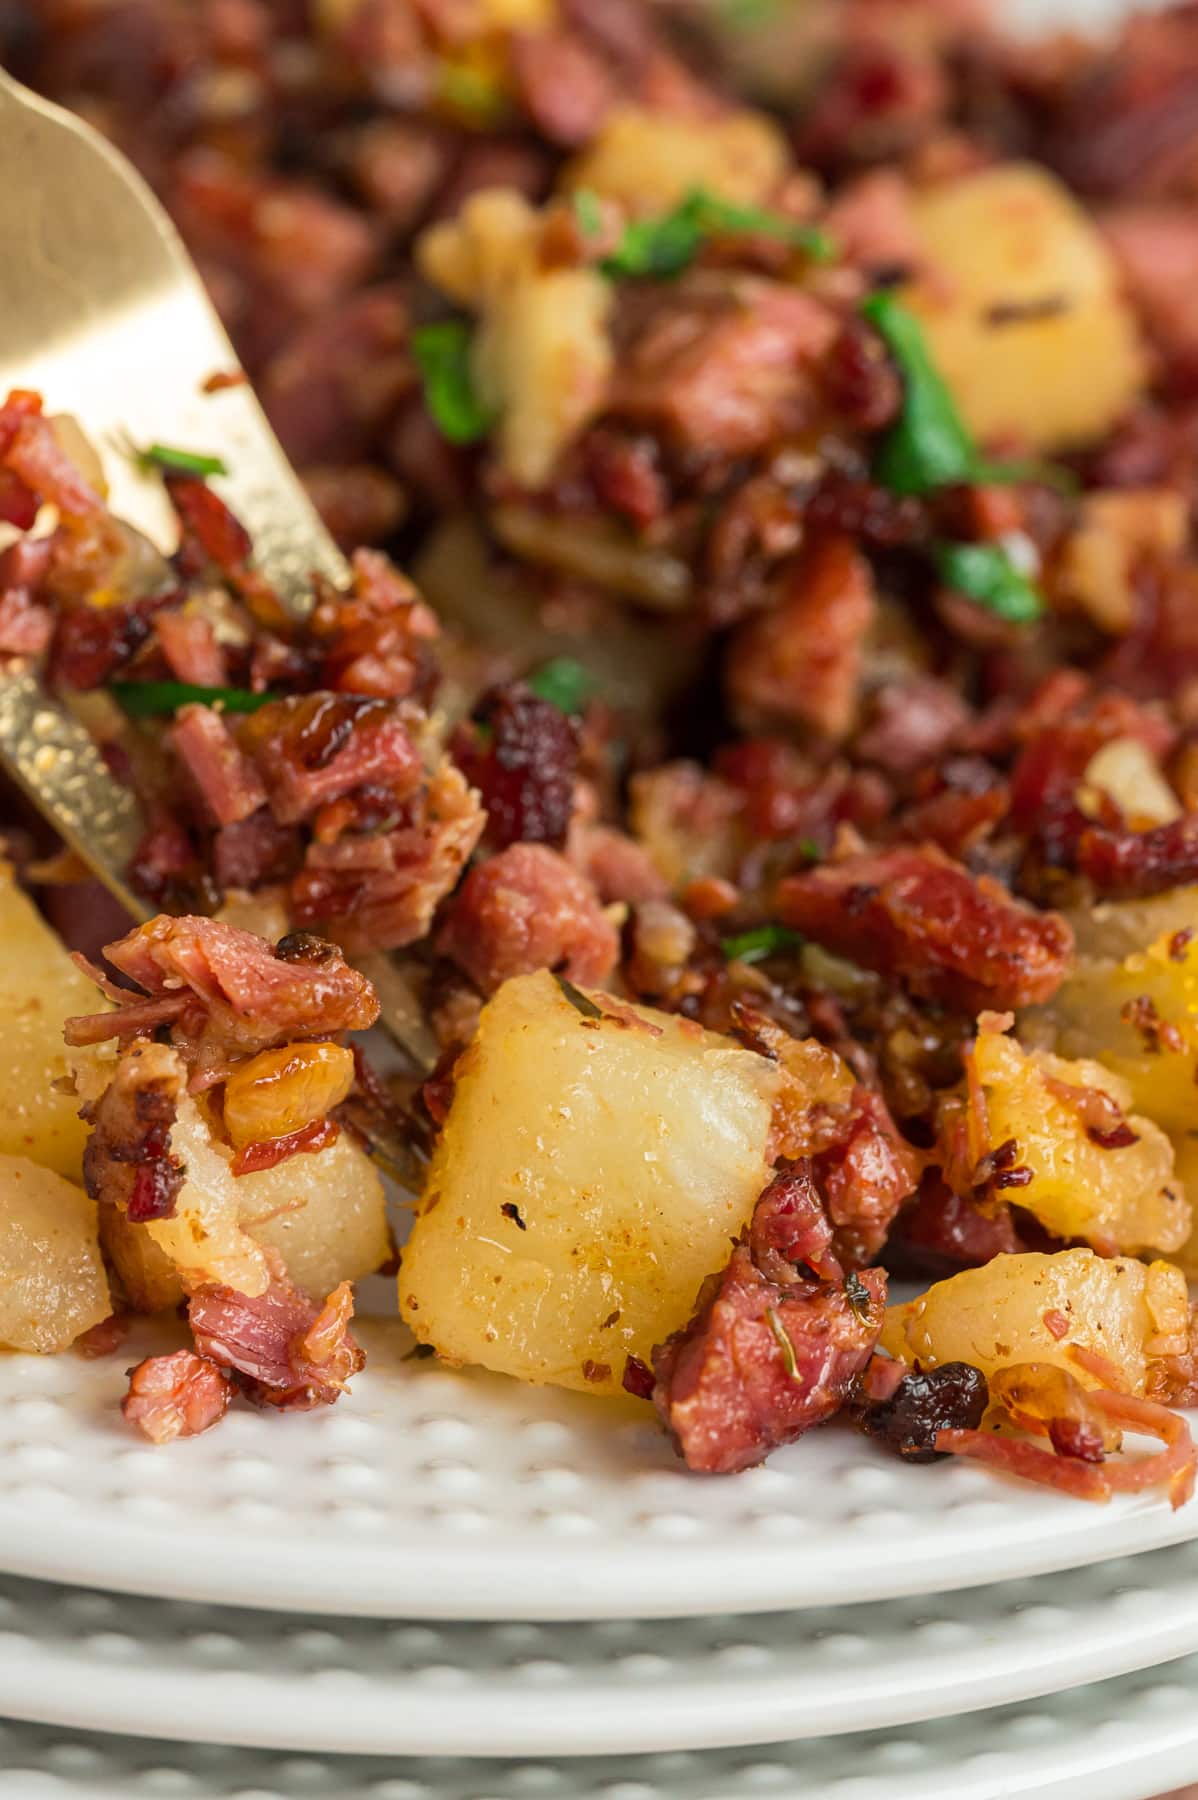 A close-up view of corned beef hash.